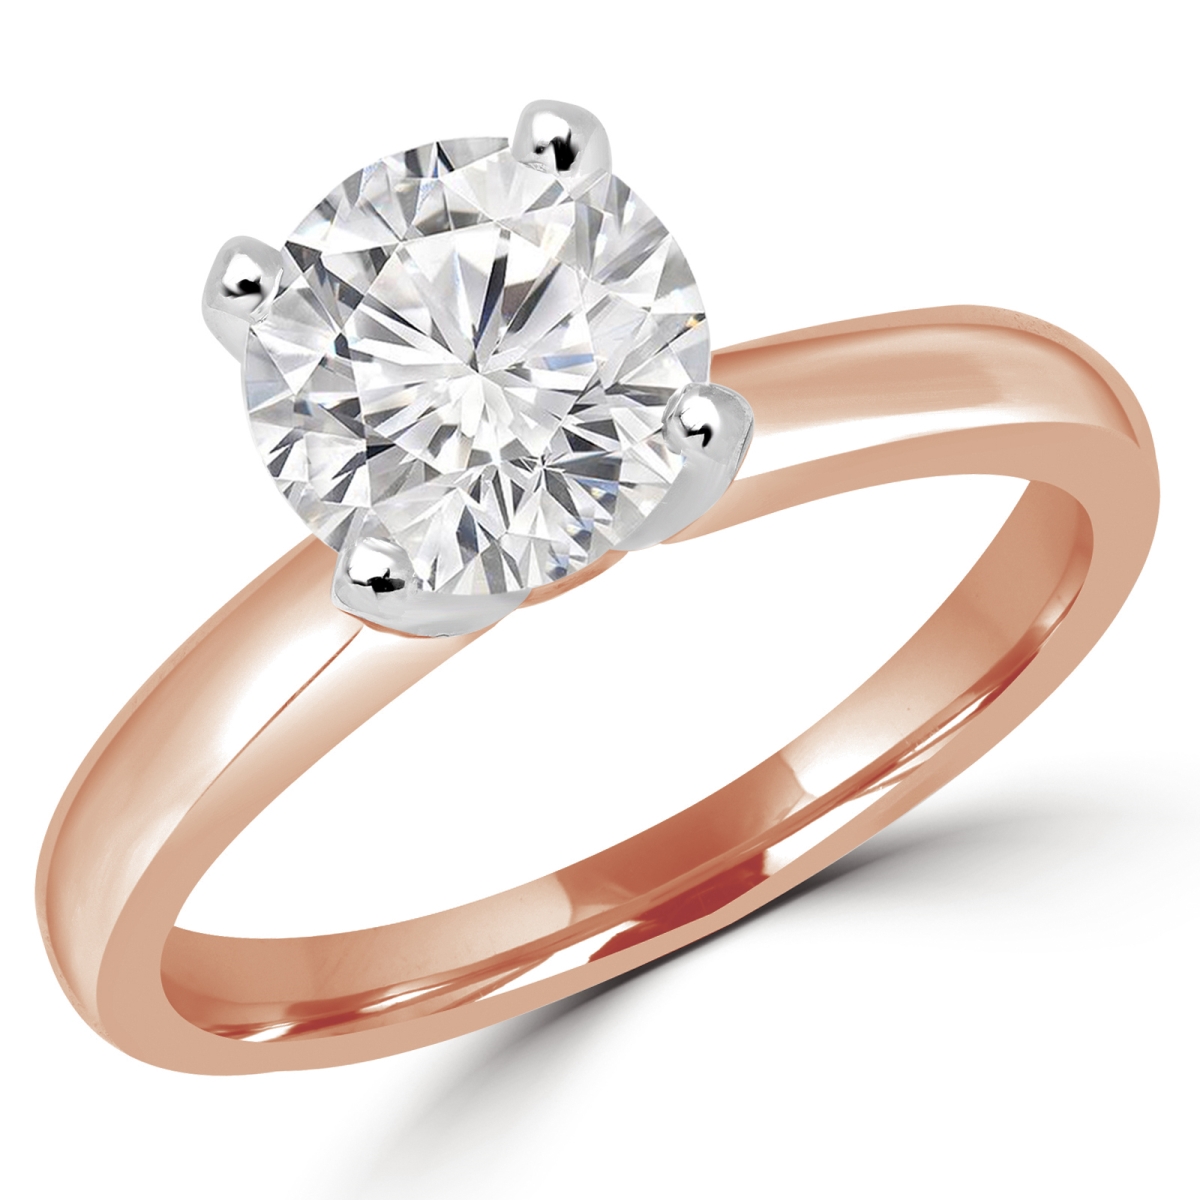 Picture of Majesty Diamonds MD180009-9 0.6 CT Round Diamond Solitaire Engagement Ring in 14K Rose Gold - Size 9